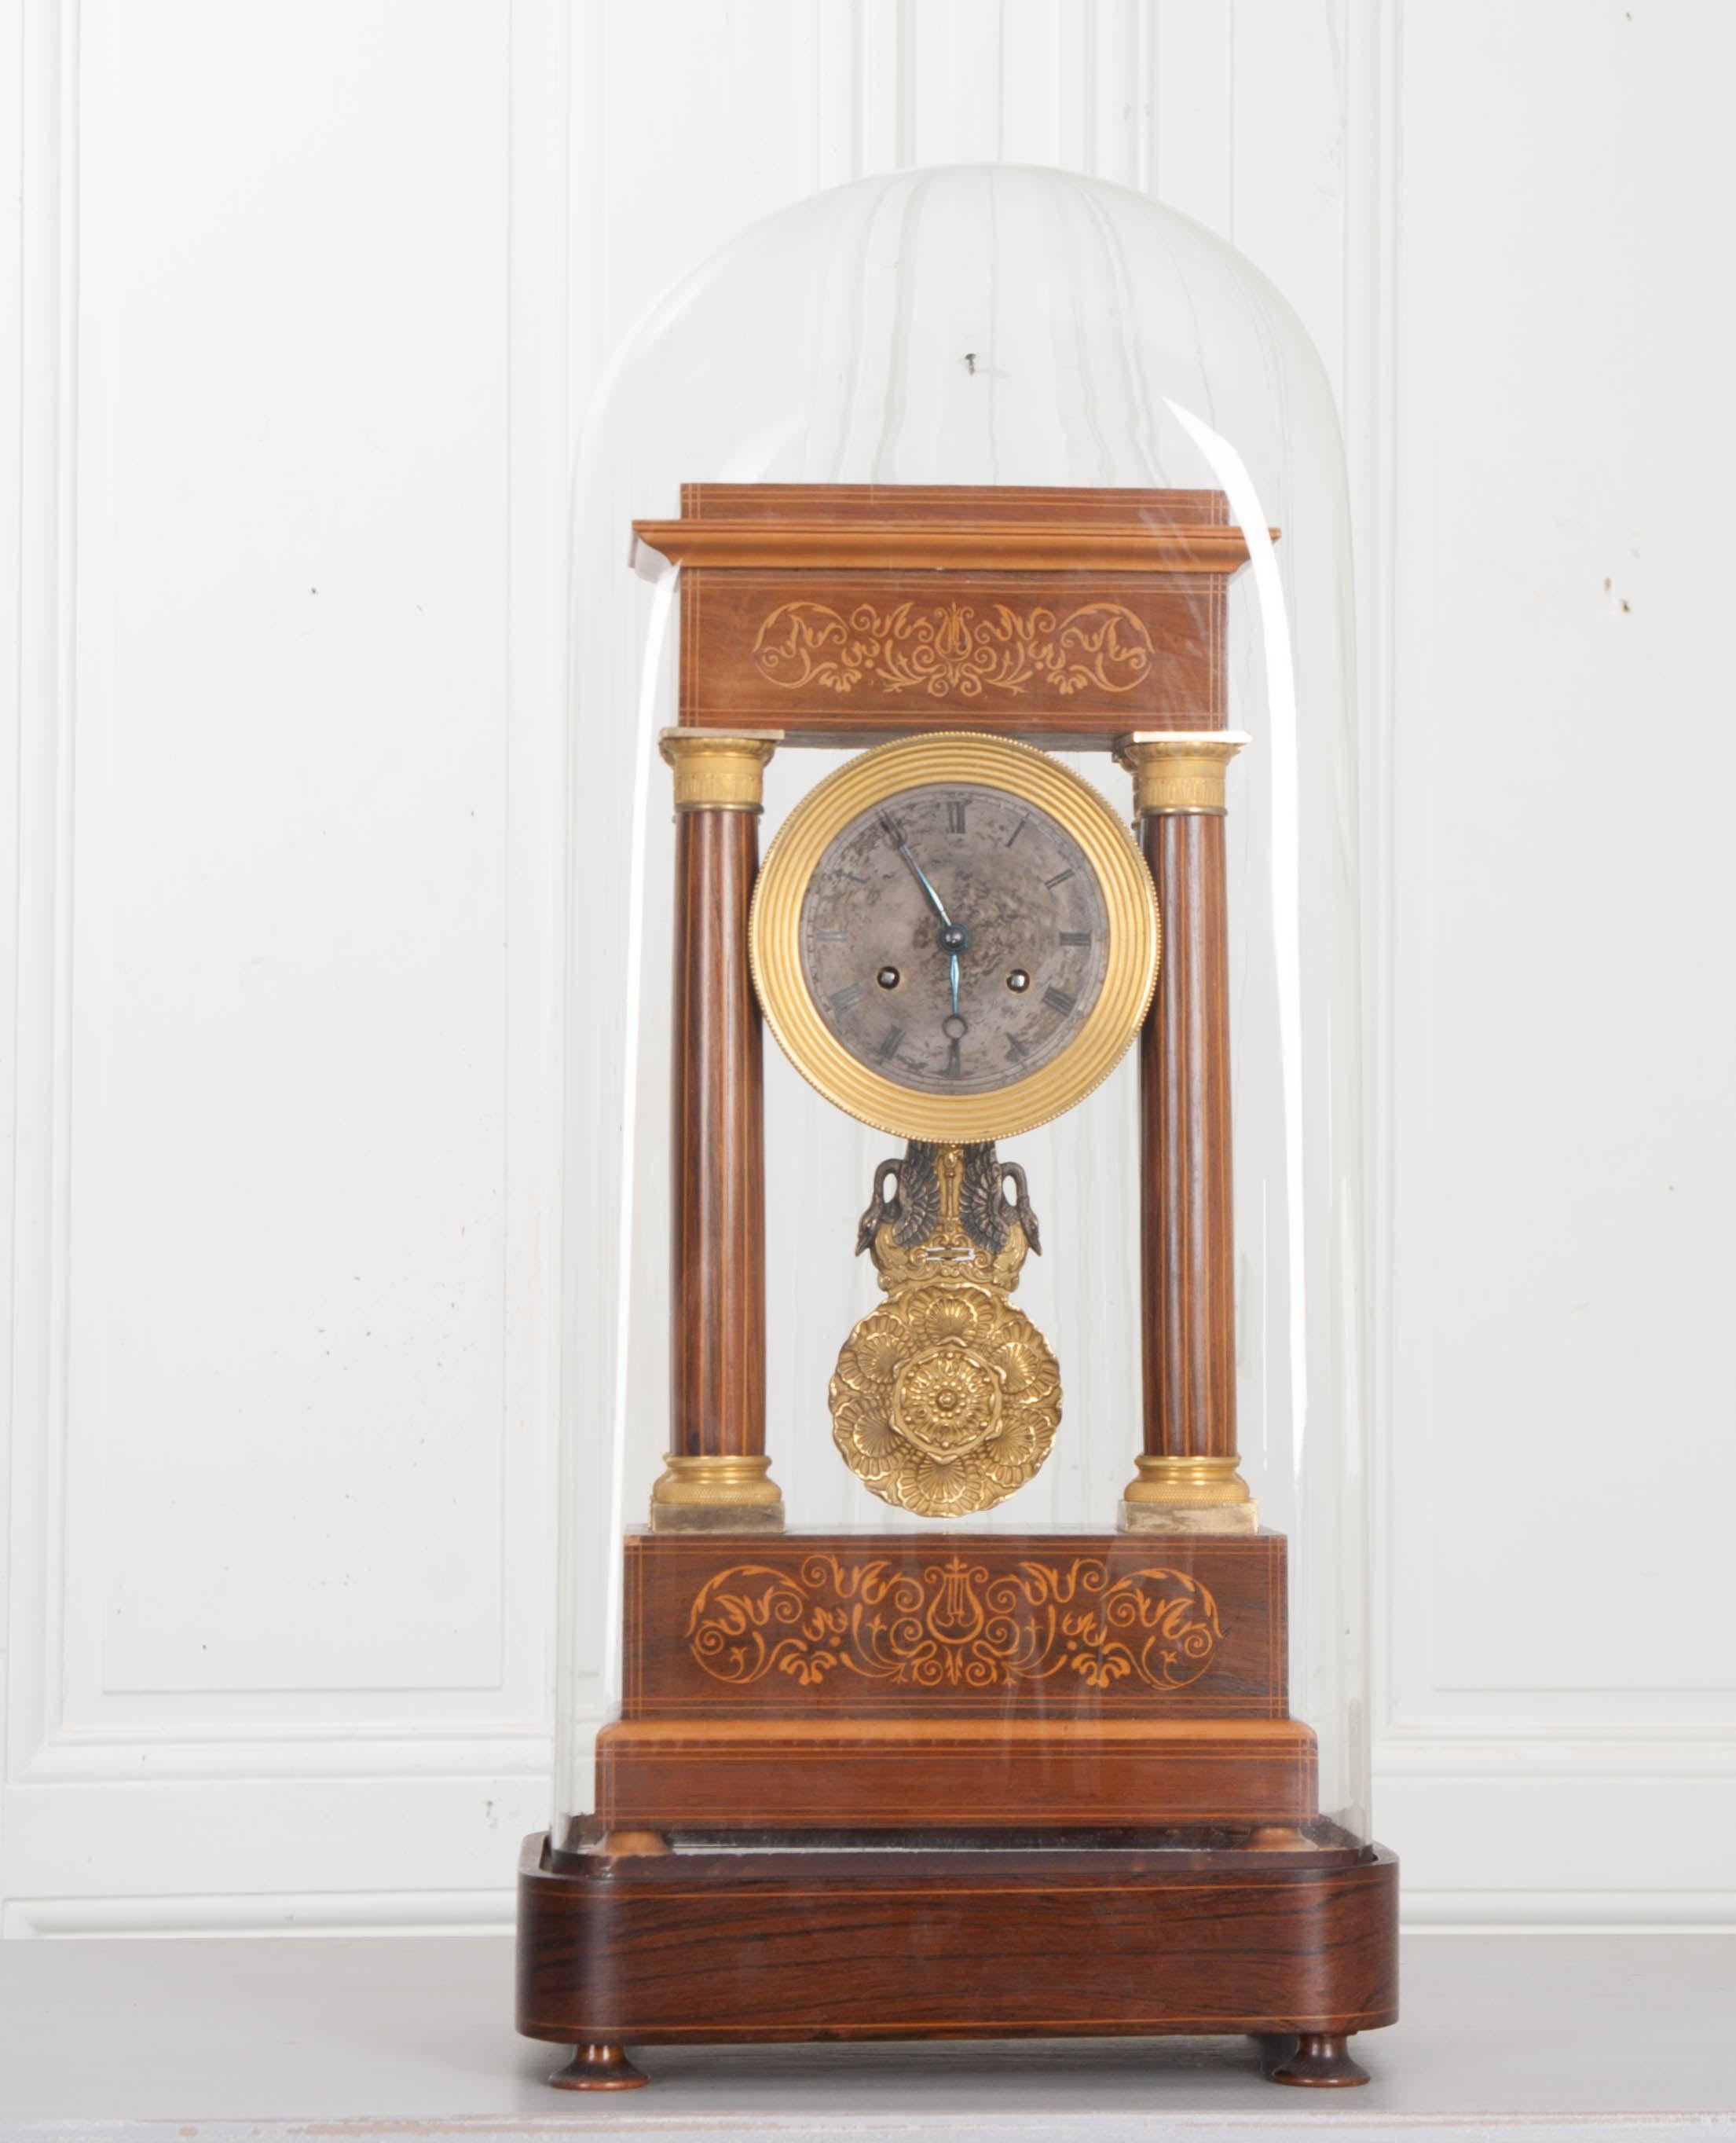 This French 19th century marquetry-inlaid satinwood and gilt-bronze portico clock, circa 1840s, features a floral-and-foliate-inlaid frieze over four line-inlaid satinwood columns with gilt-bronze capitals having diapered and acanthus-leaf detail